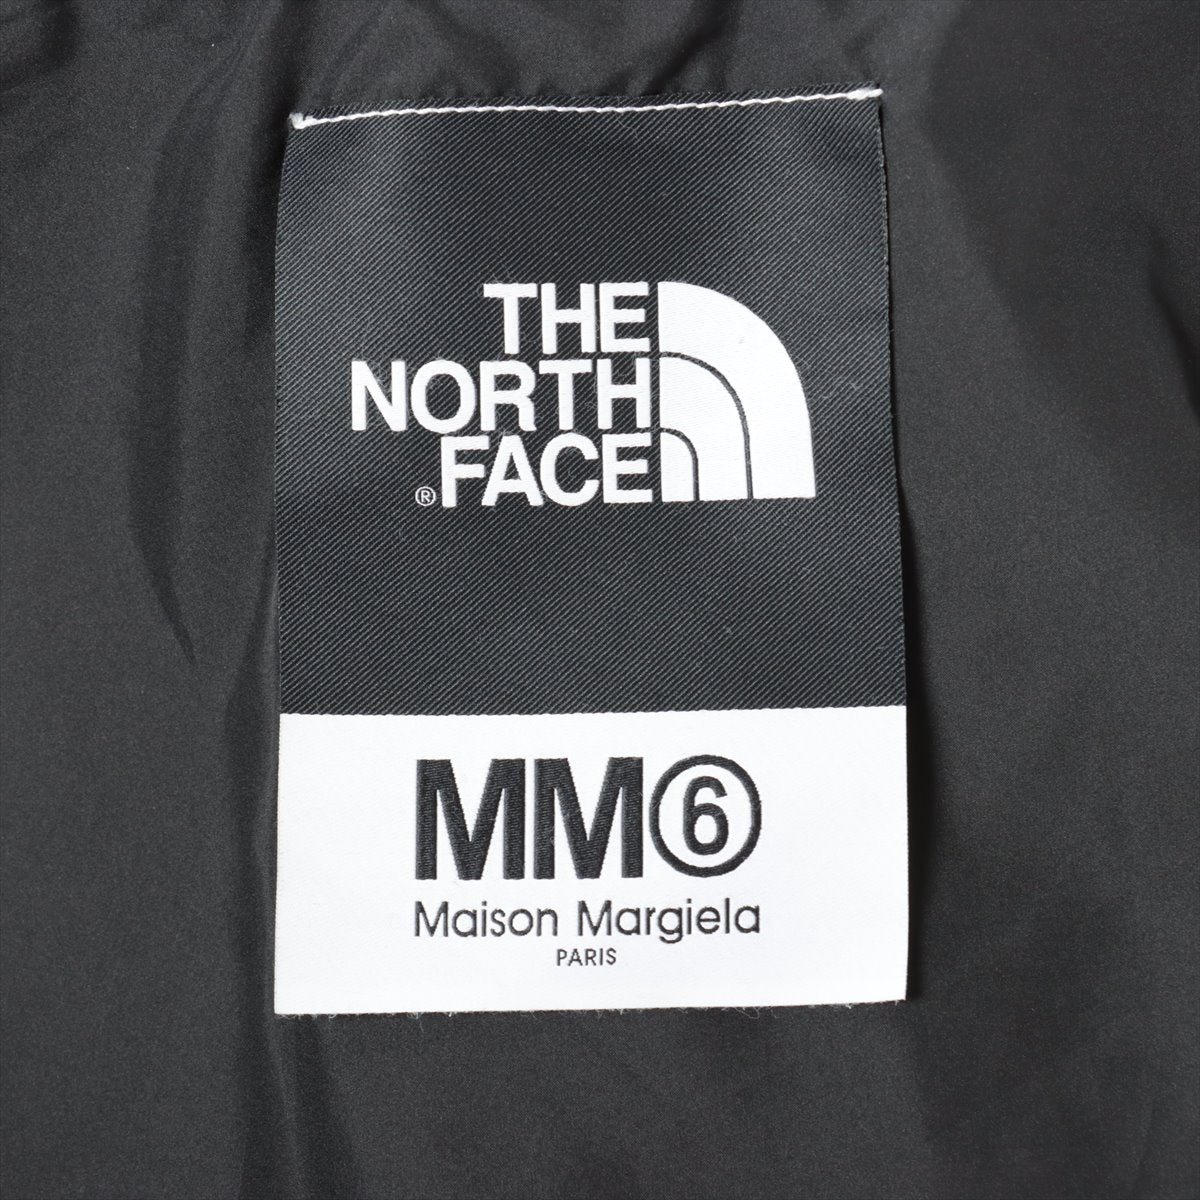 MM6 x The North Face 20AW Polyester & nylon Mountain hoodie S Ladies' Black  S62AN0040 CIRCLE MOUNTAIN JACKET